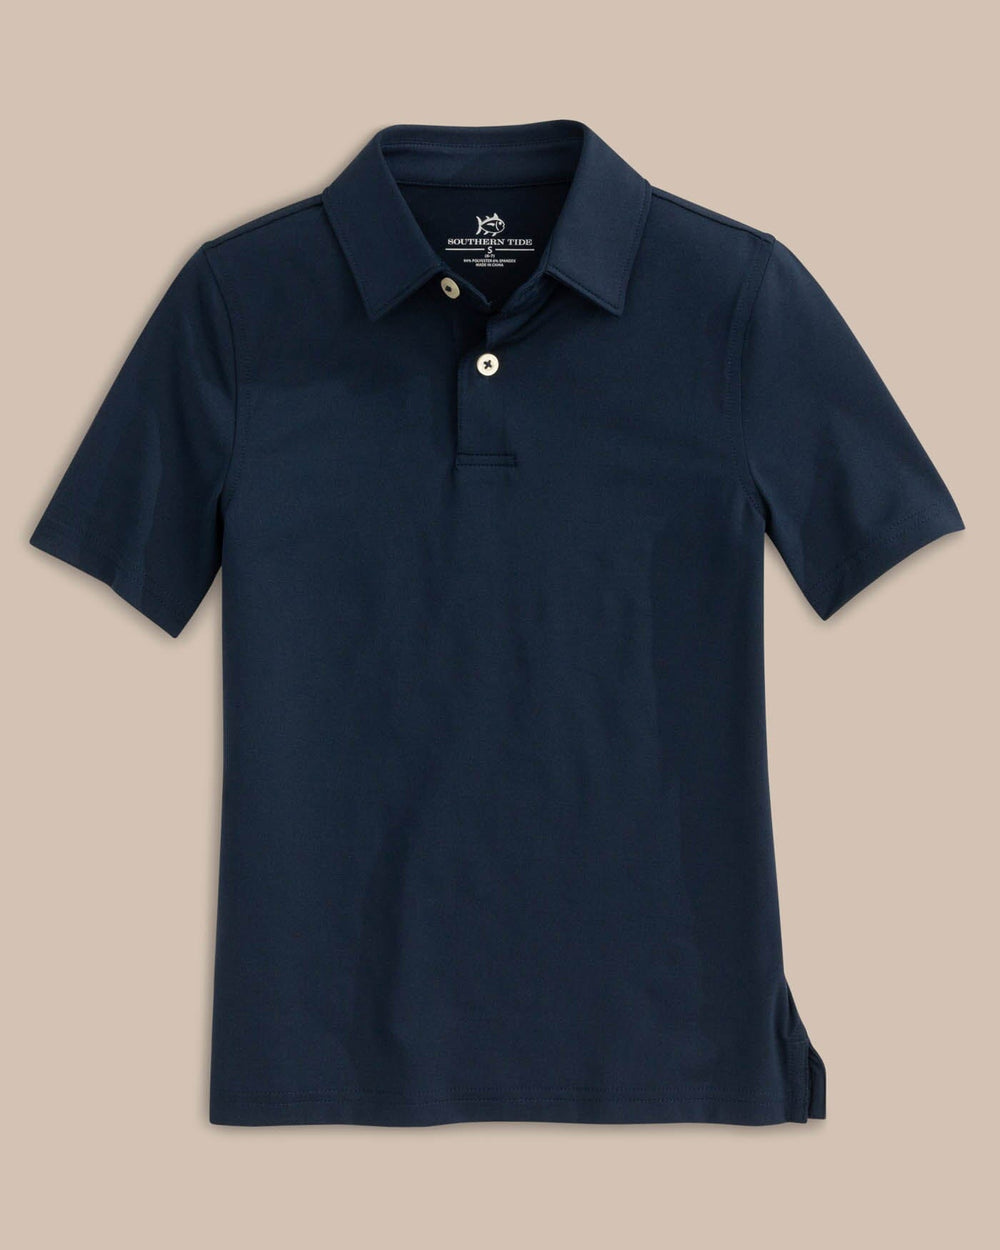 The front view of the Boys Driver Performance Polo Shirt by Southern Tide - True Navy